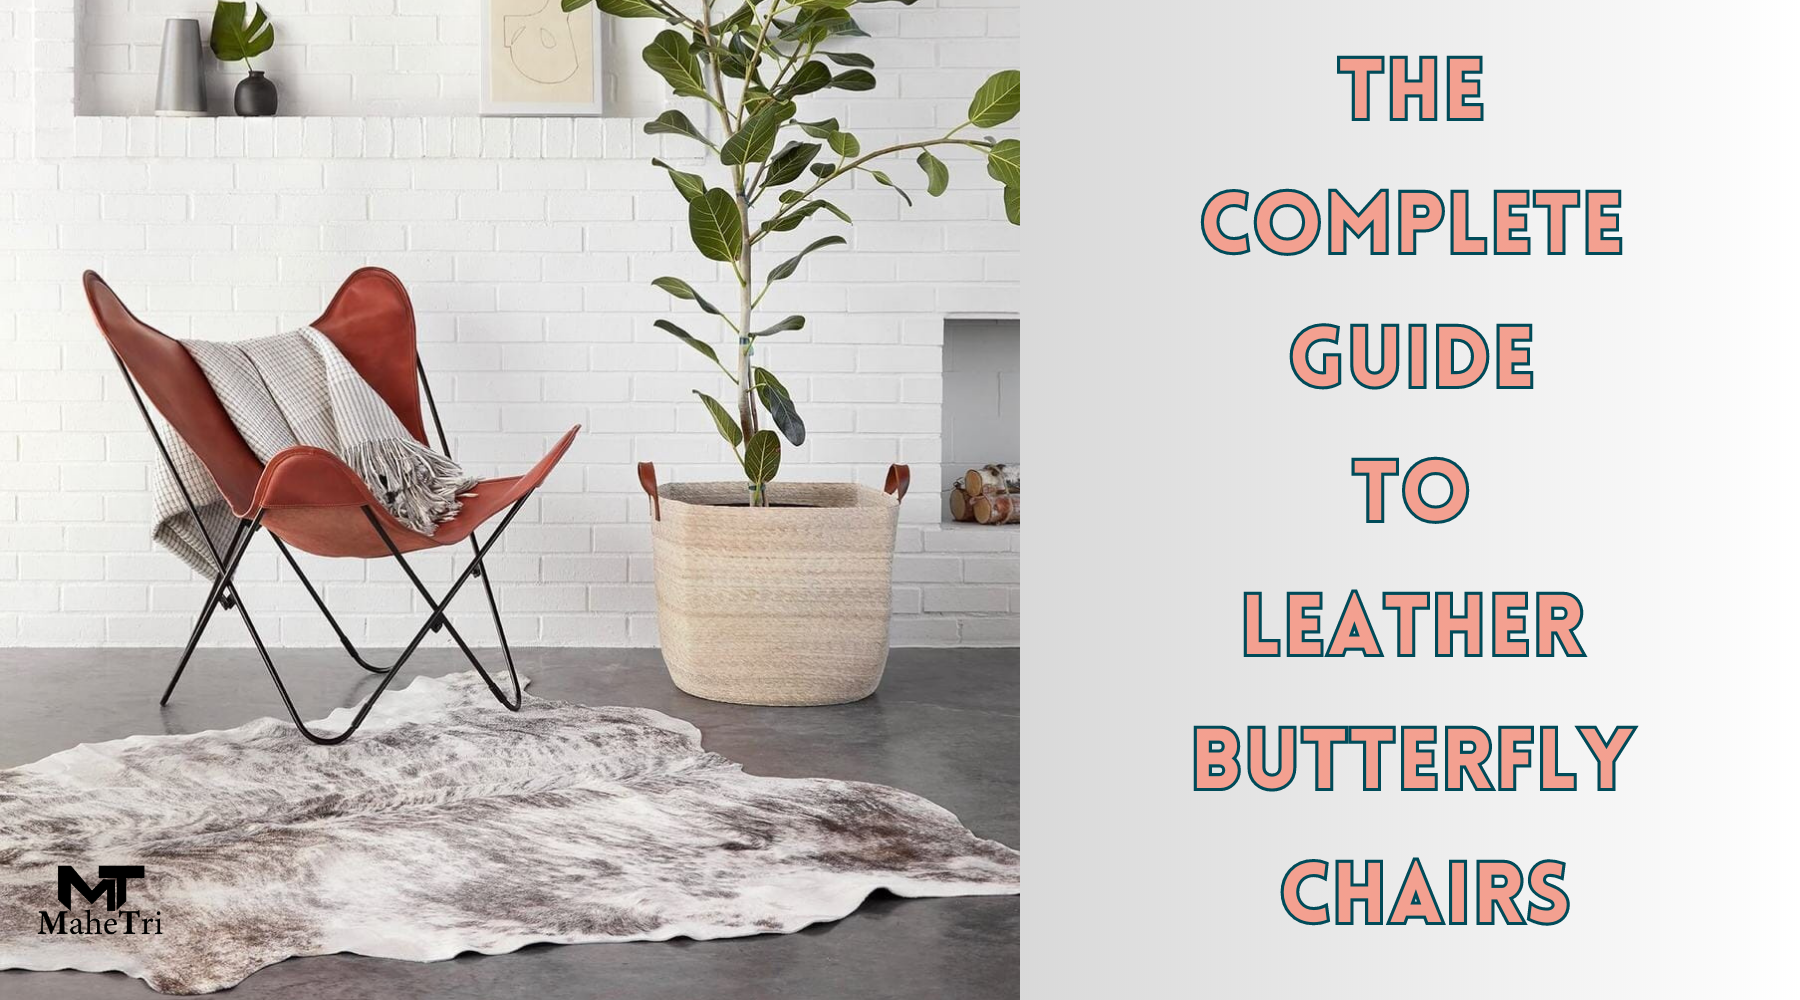 The Complete Guide to Leather Butterfly Chairs